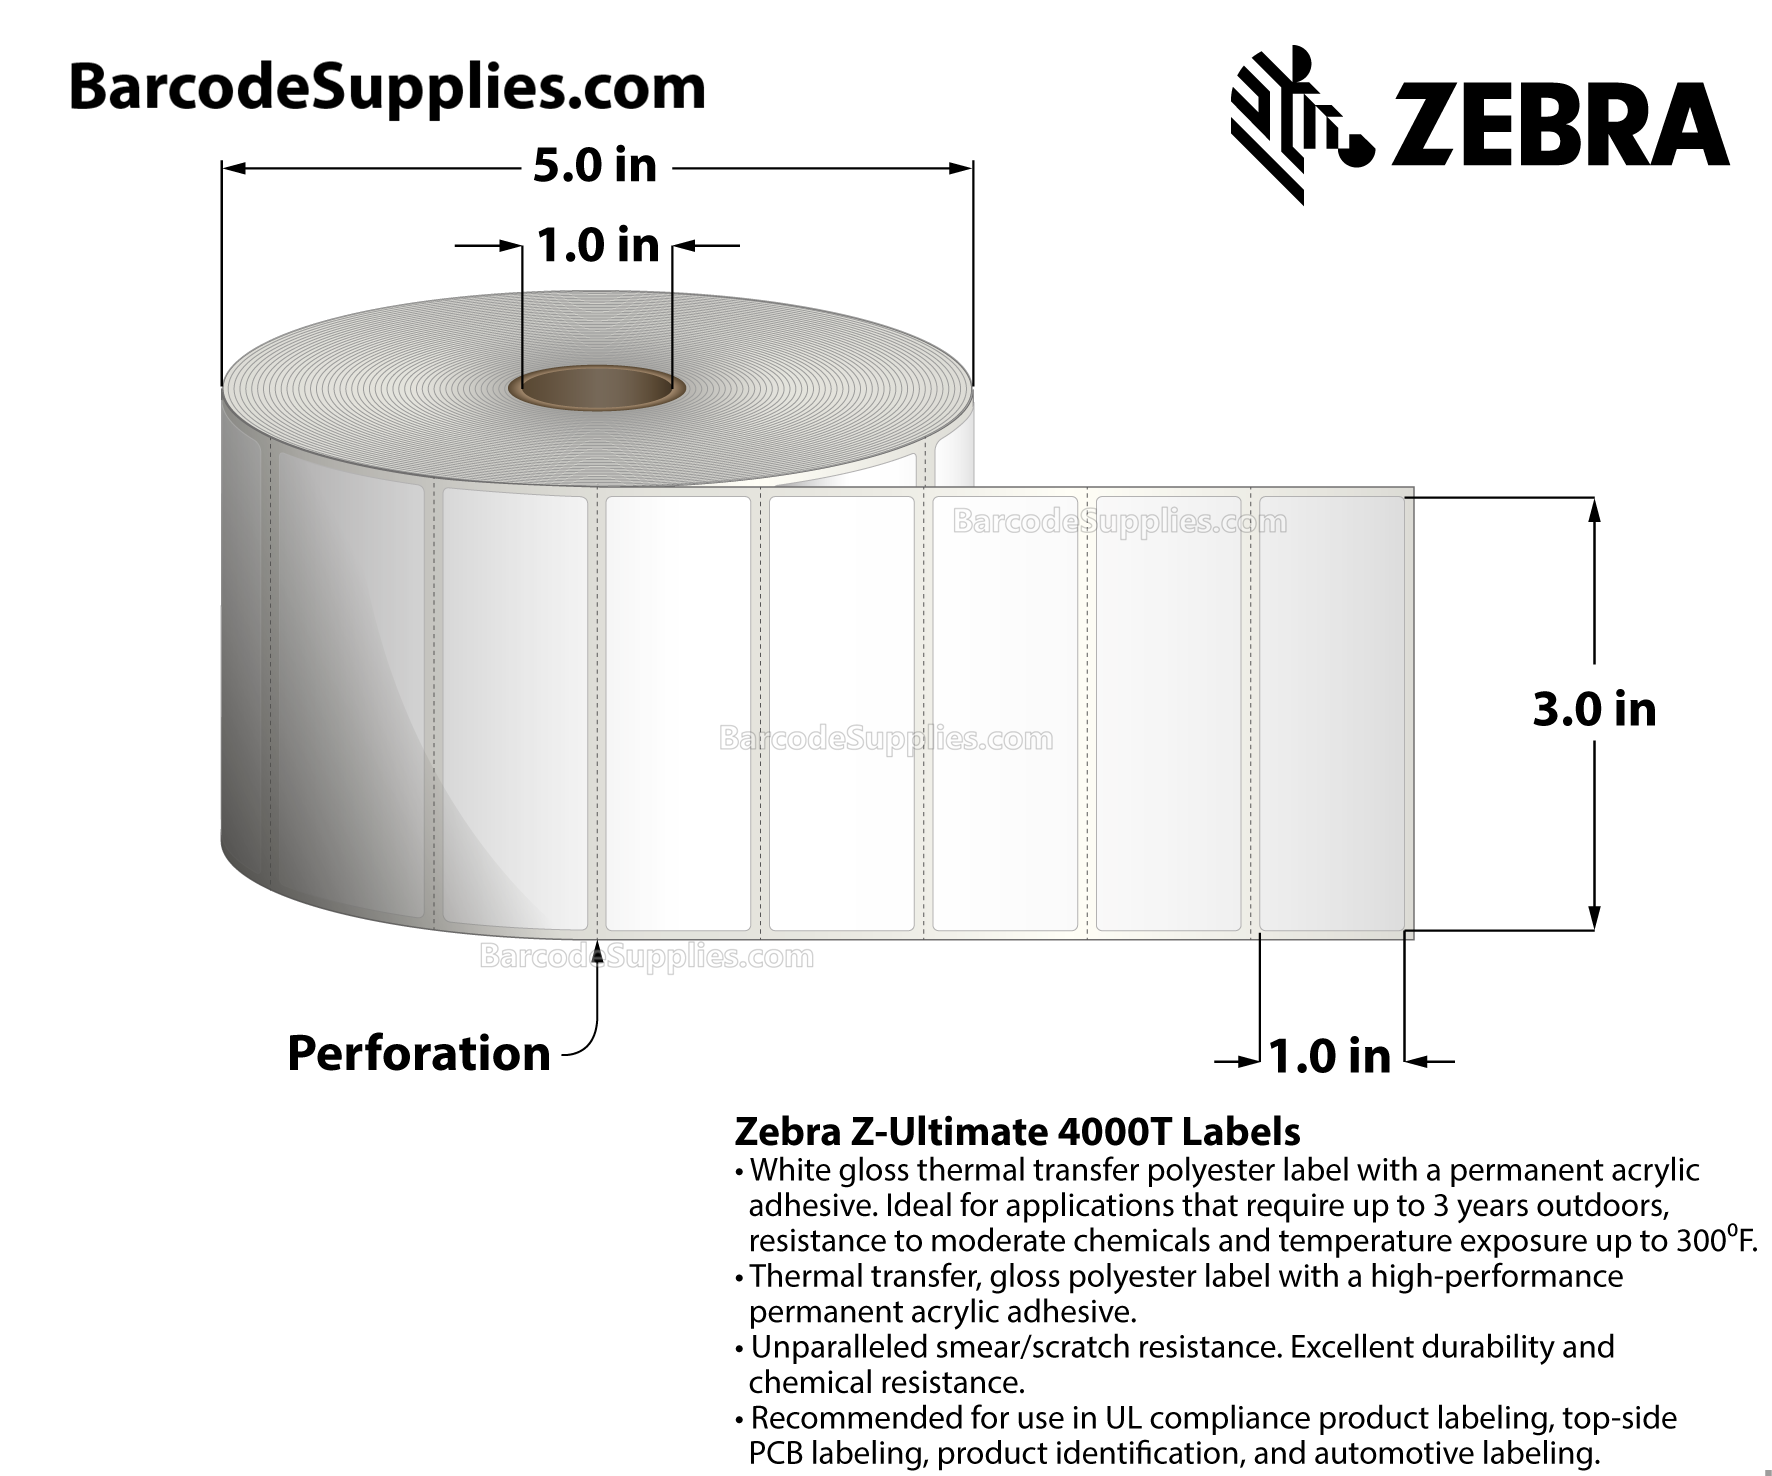 3 x 1 Thermal Transfer White Z-Ultimate 4000T Labels With Permanent Adhesive - Perforated - 2530 Labels Per Roll - Carton Of 6 Rolls - 15180 Labels Total - MPN: 10002630